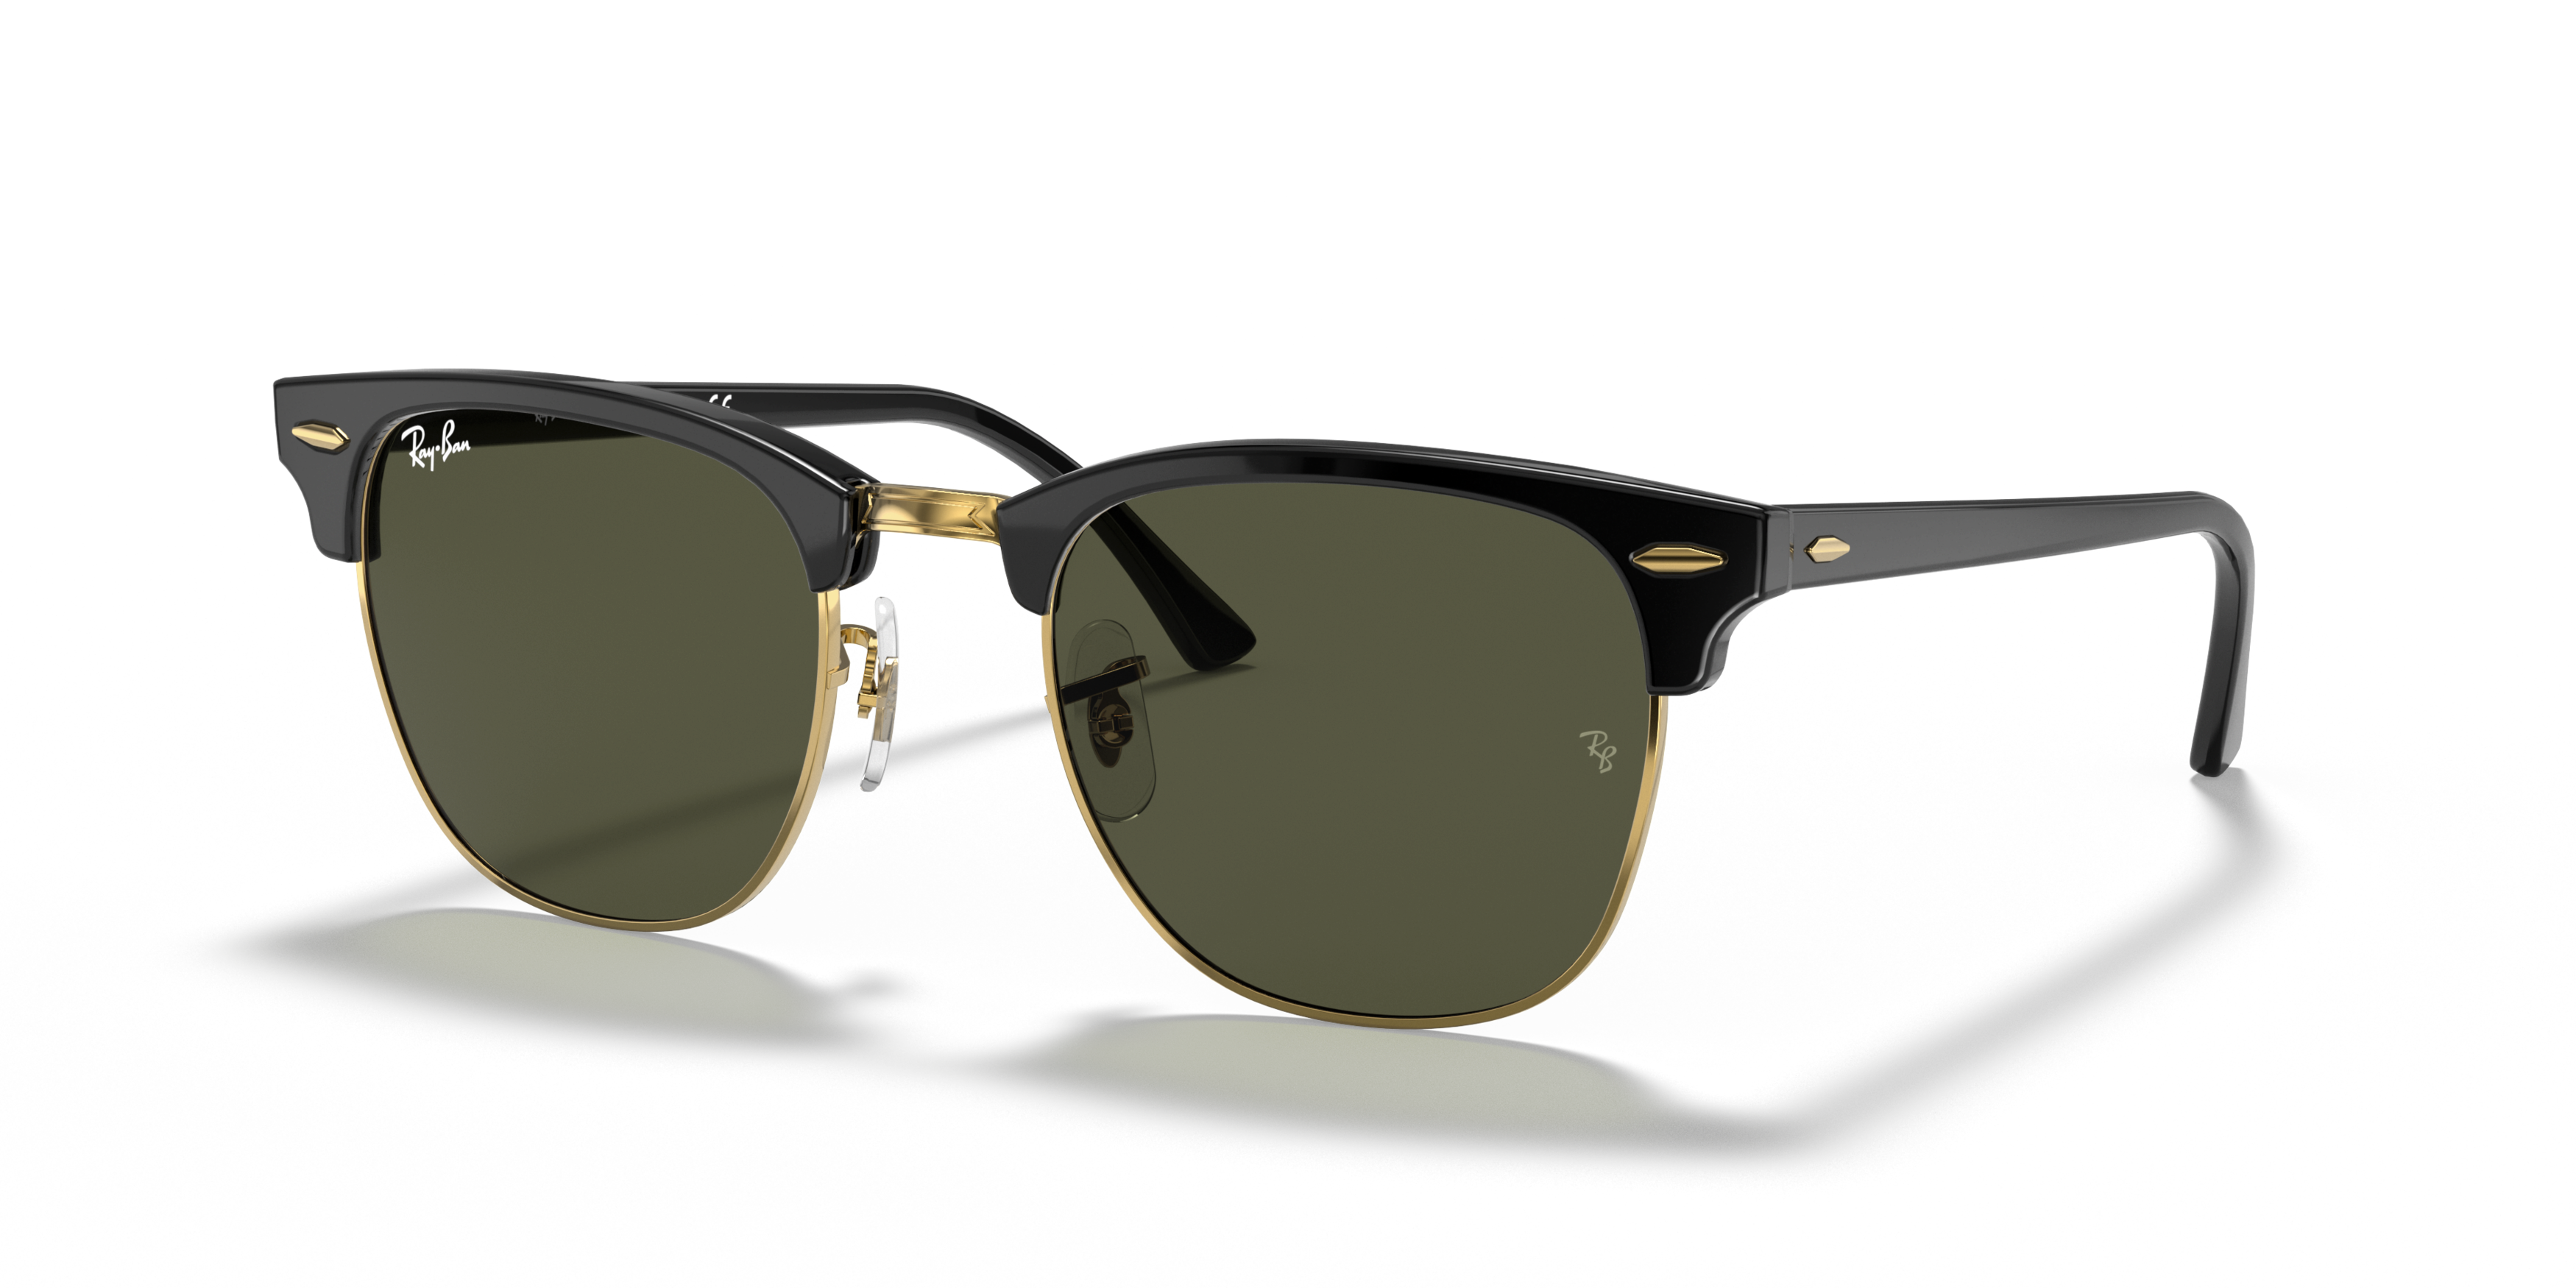 Angle_Left01 Ray-Ban Clubmaster 0RB3016 W0365 Verde / Negro